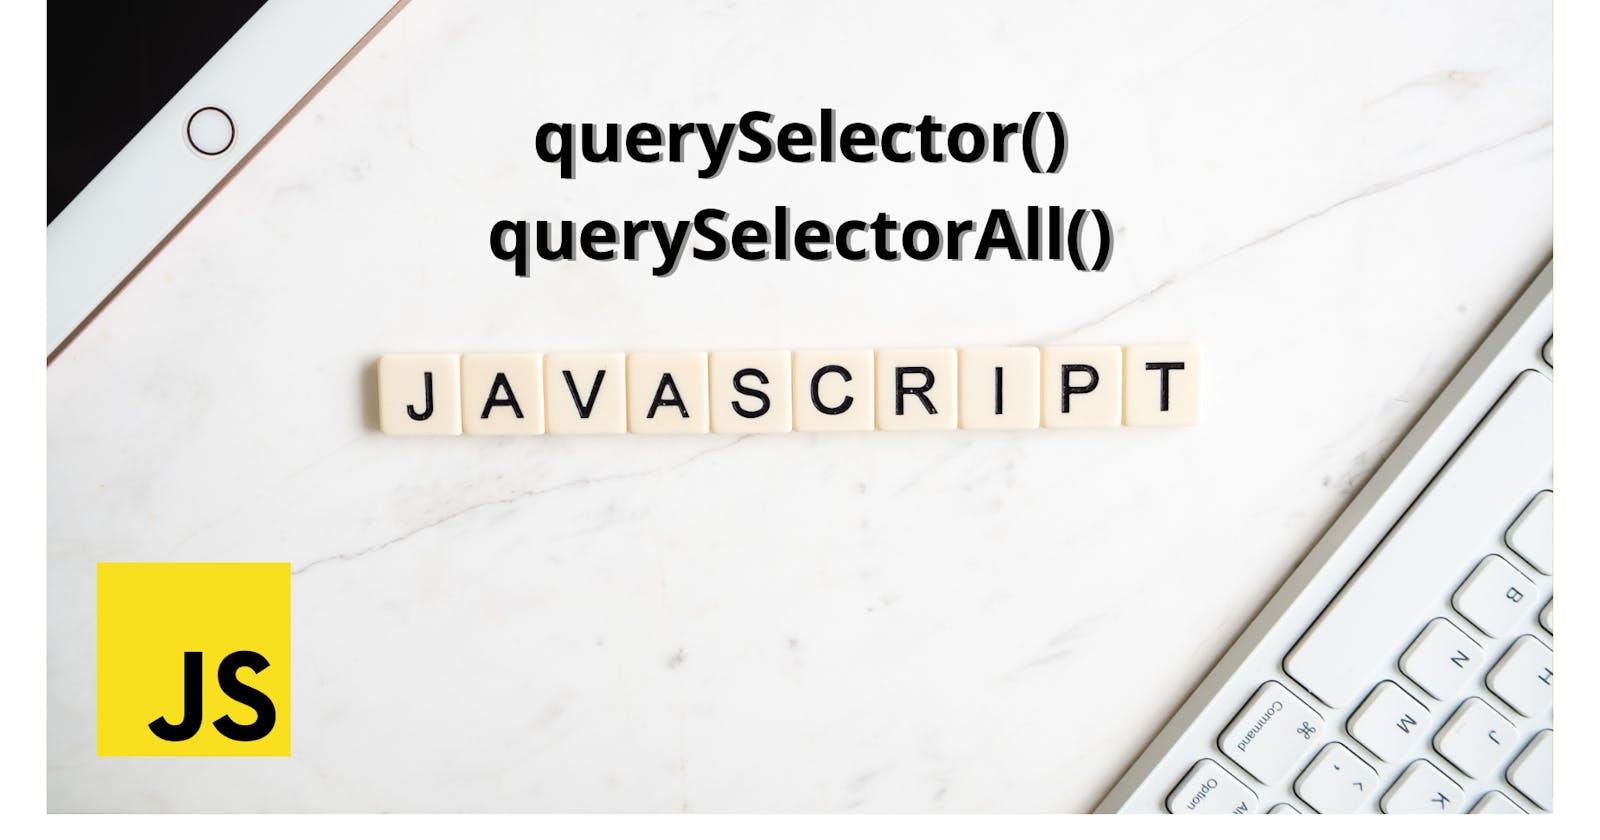 Introducing querySelector() and querySelectorAll() on elements in JavaScript